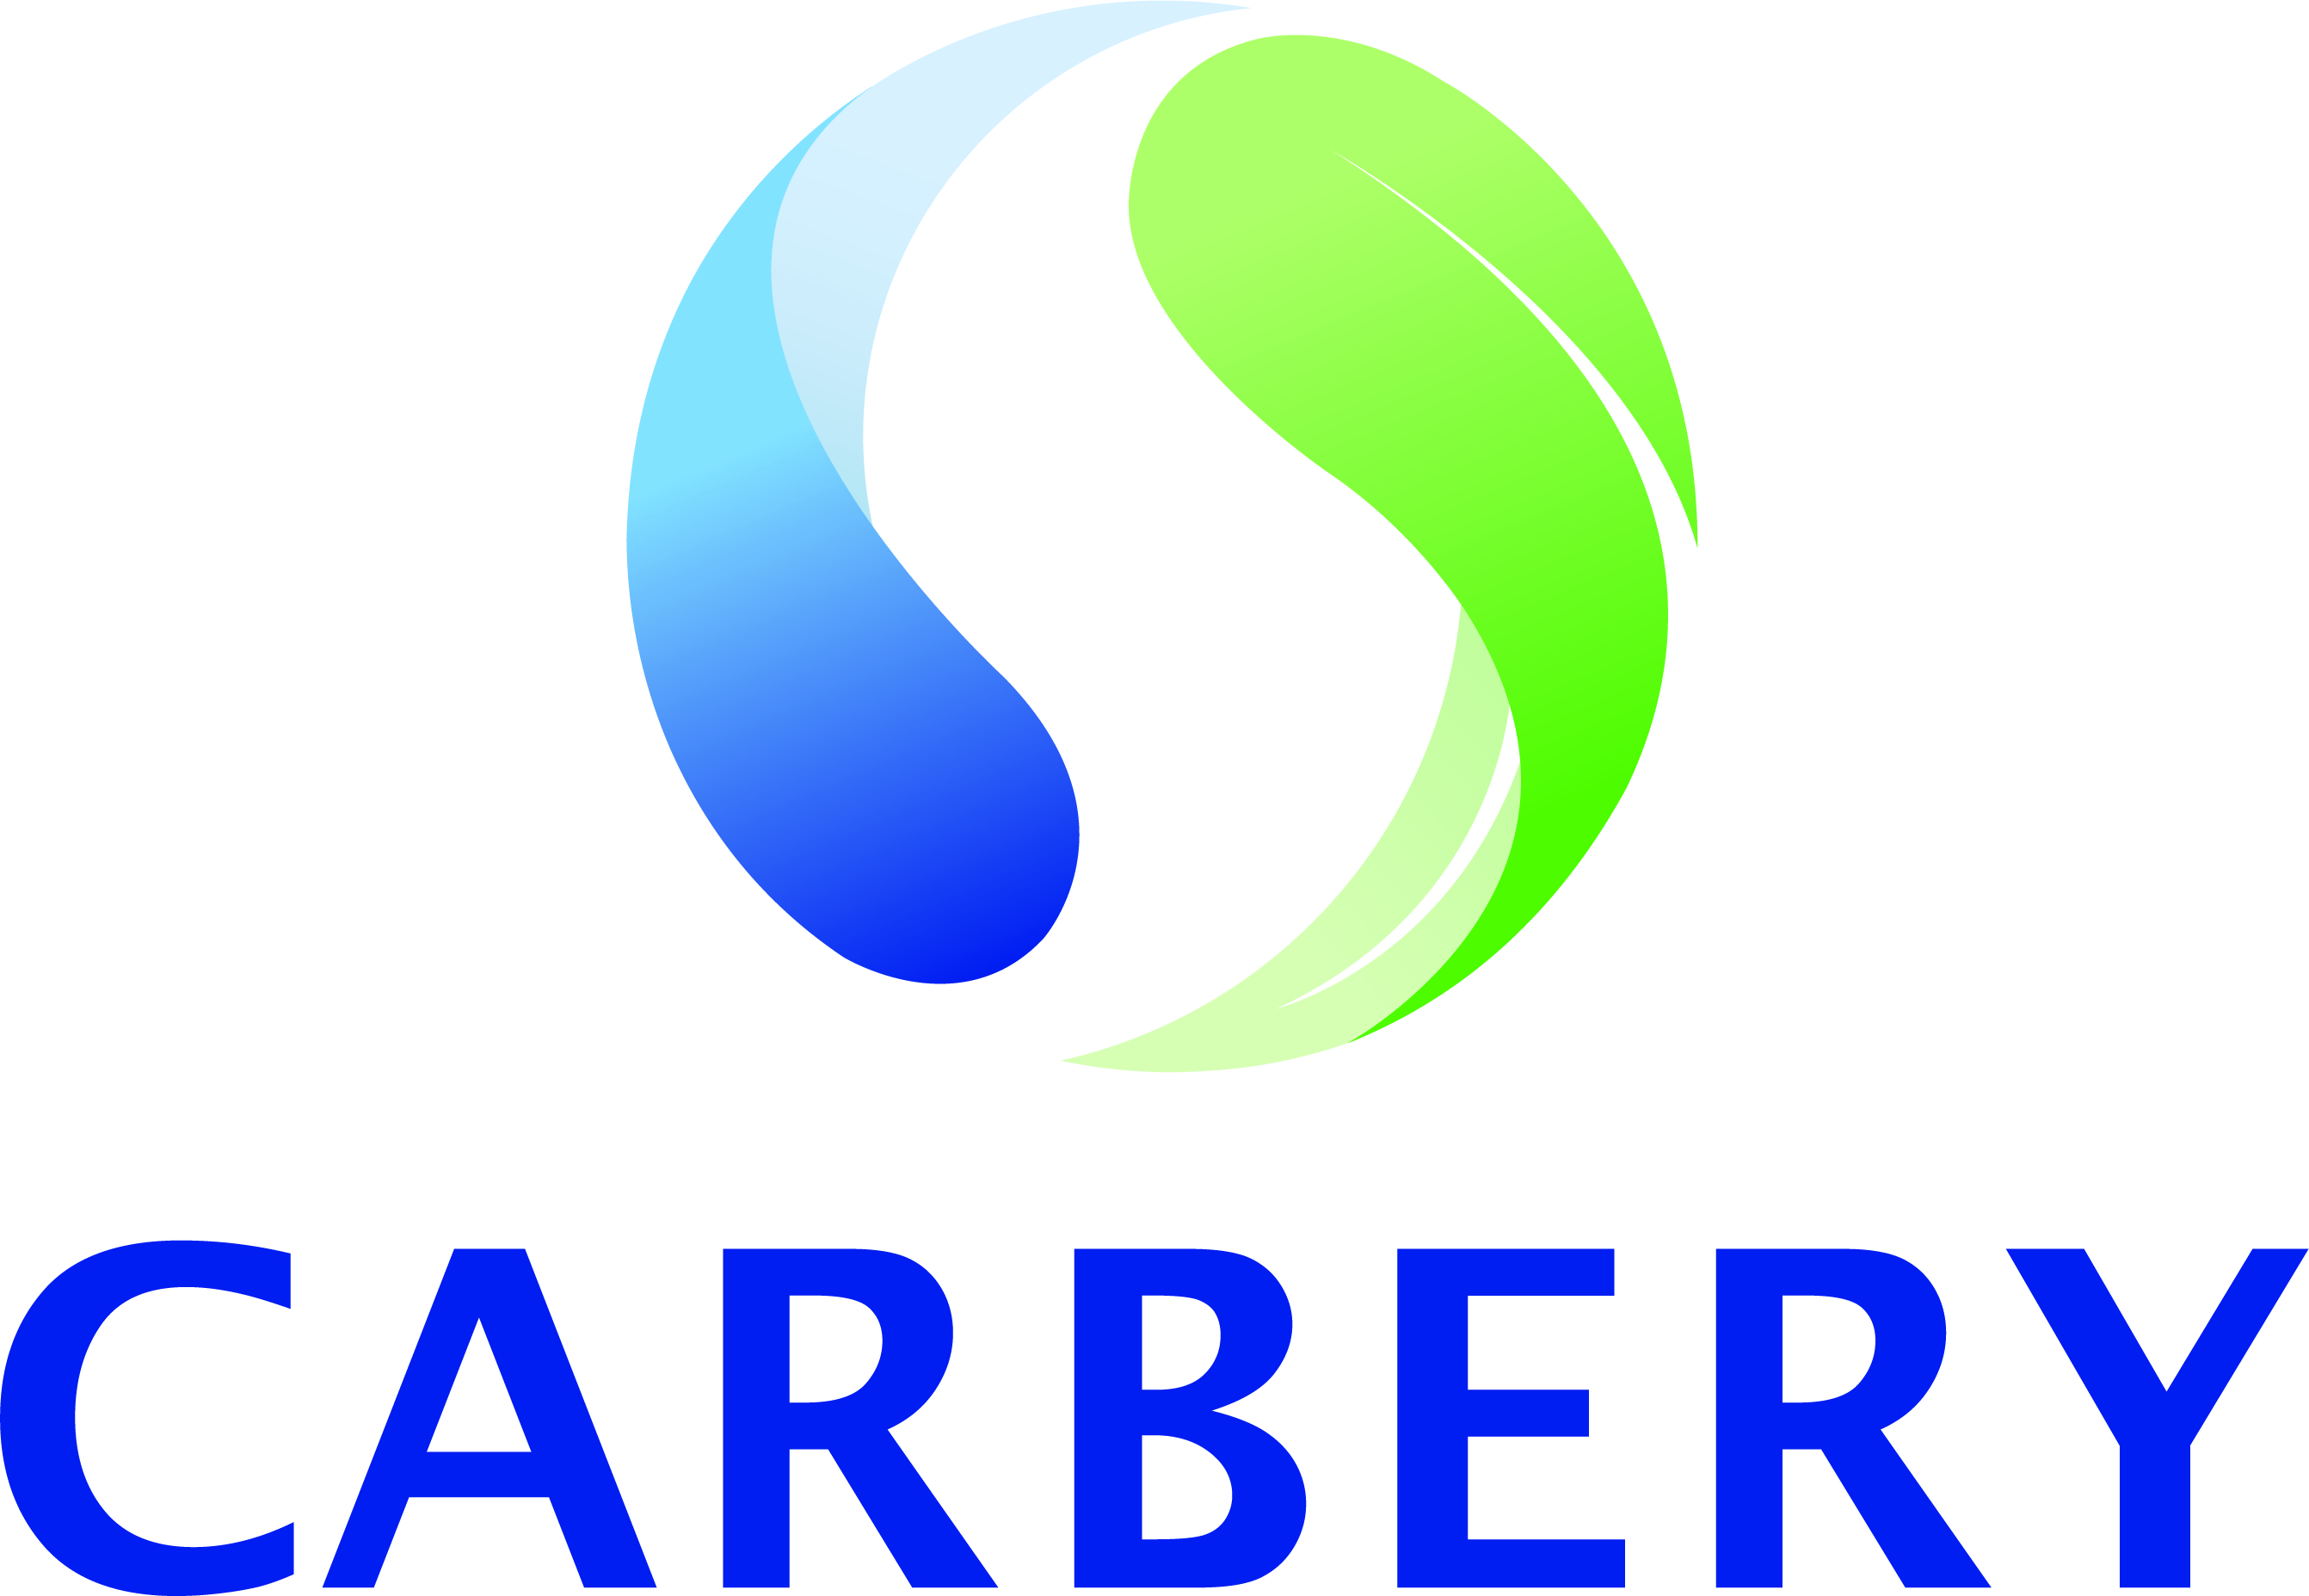 Image of Carbery logotype